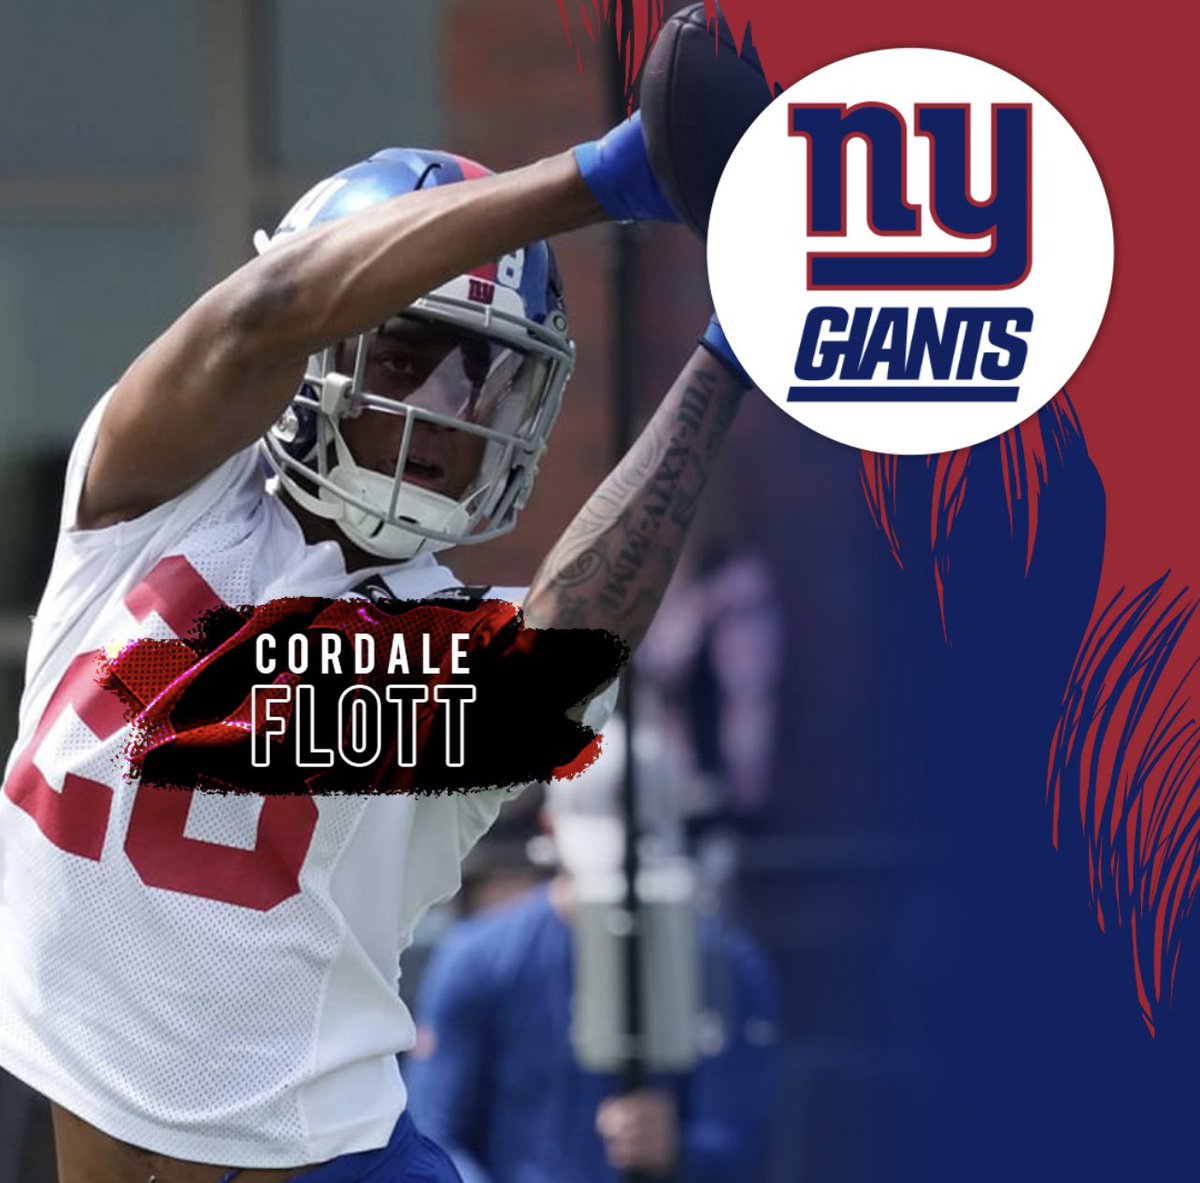 You asked and we delivered! We’re excited to announce another NFL pro is joining our camp this Summer! New York Giants Cornerback Cordale Flott will be at our camp in New Jersey this June 26th-29th! The former National Champion at LSU had a strong 2023 season with the Giants